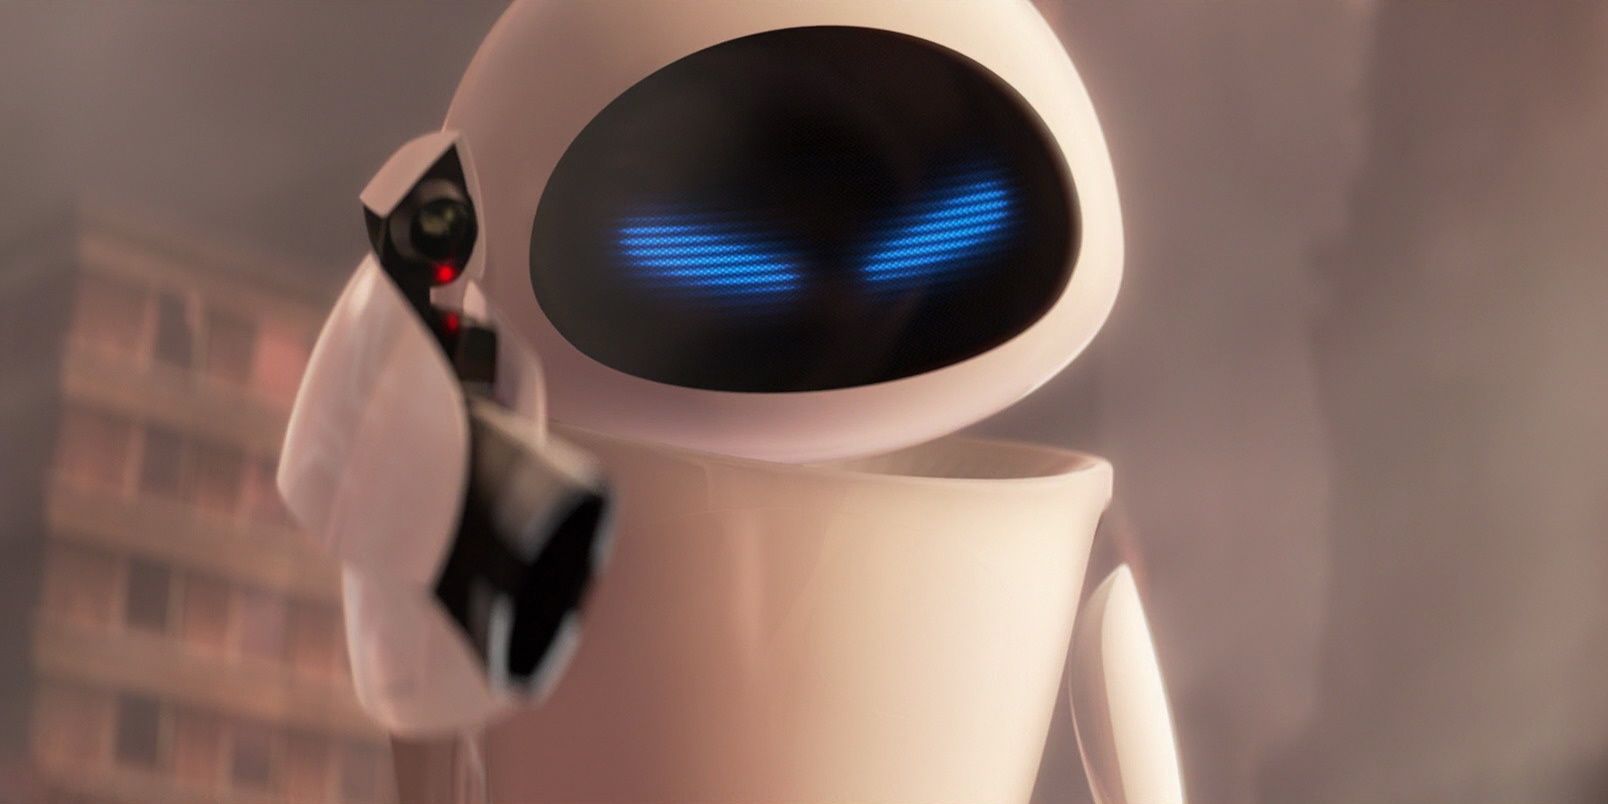 Eve from Wall-E looking angry